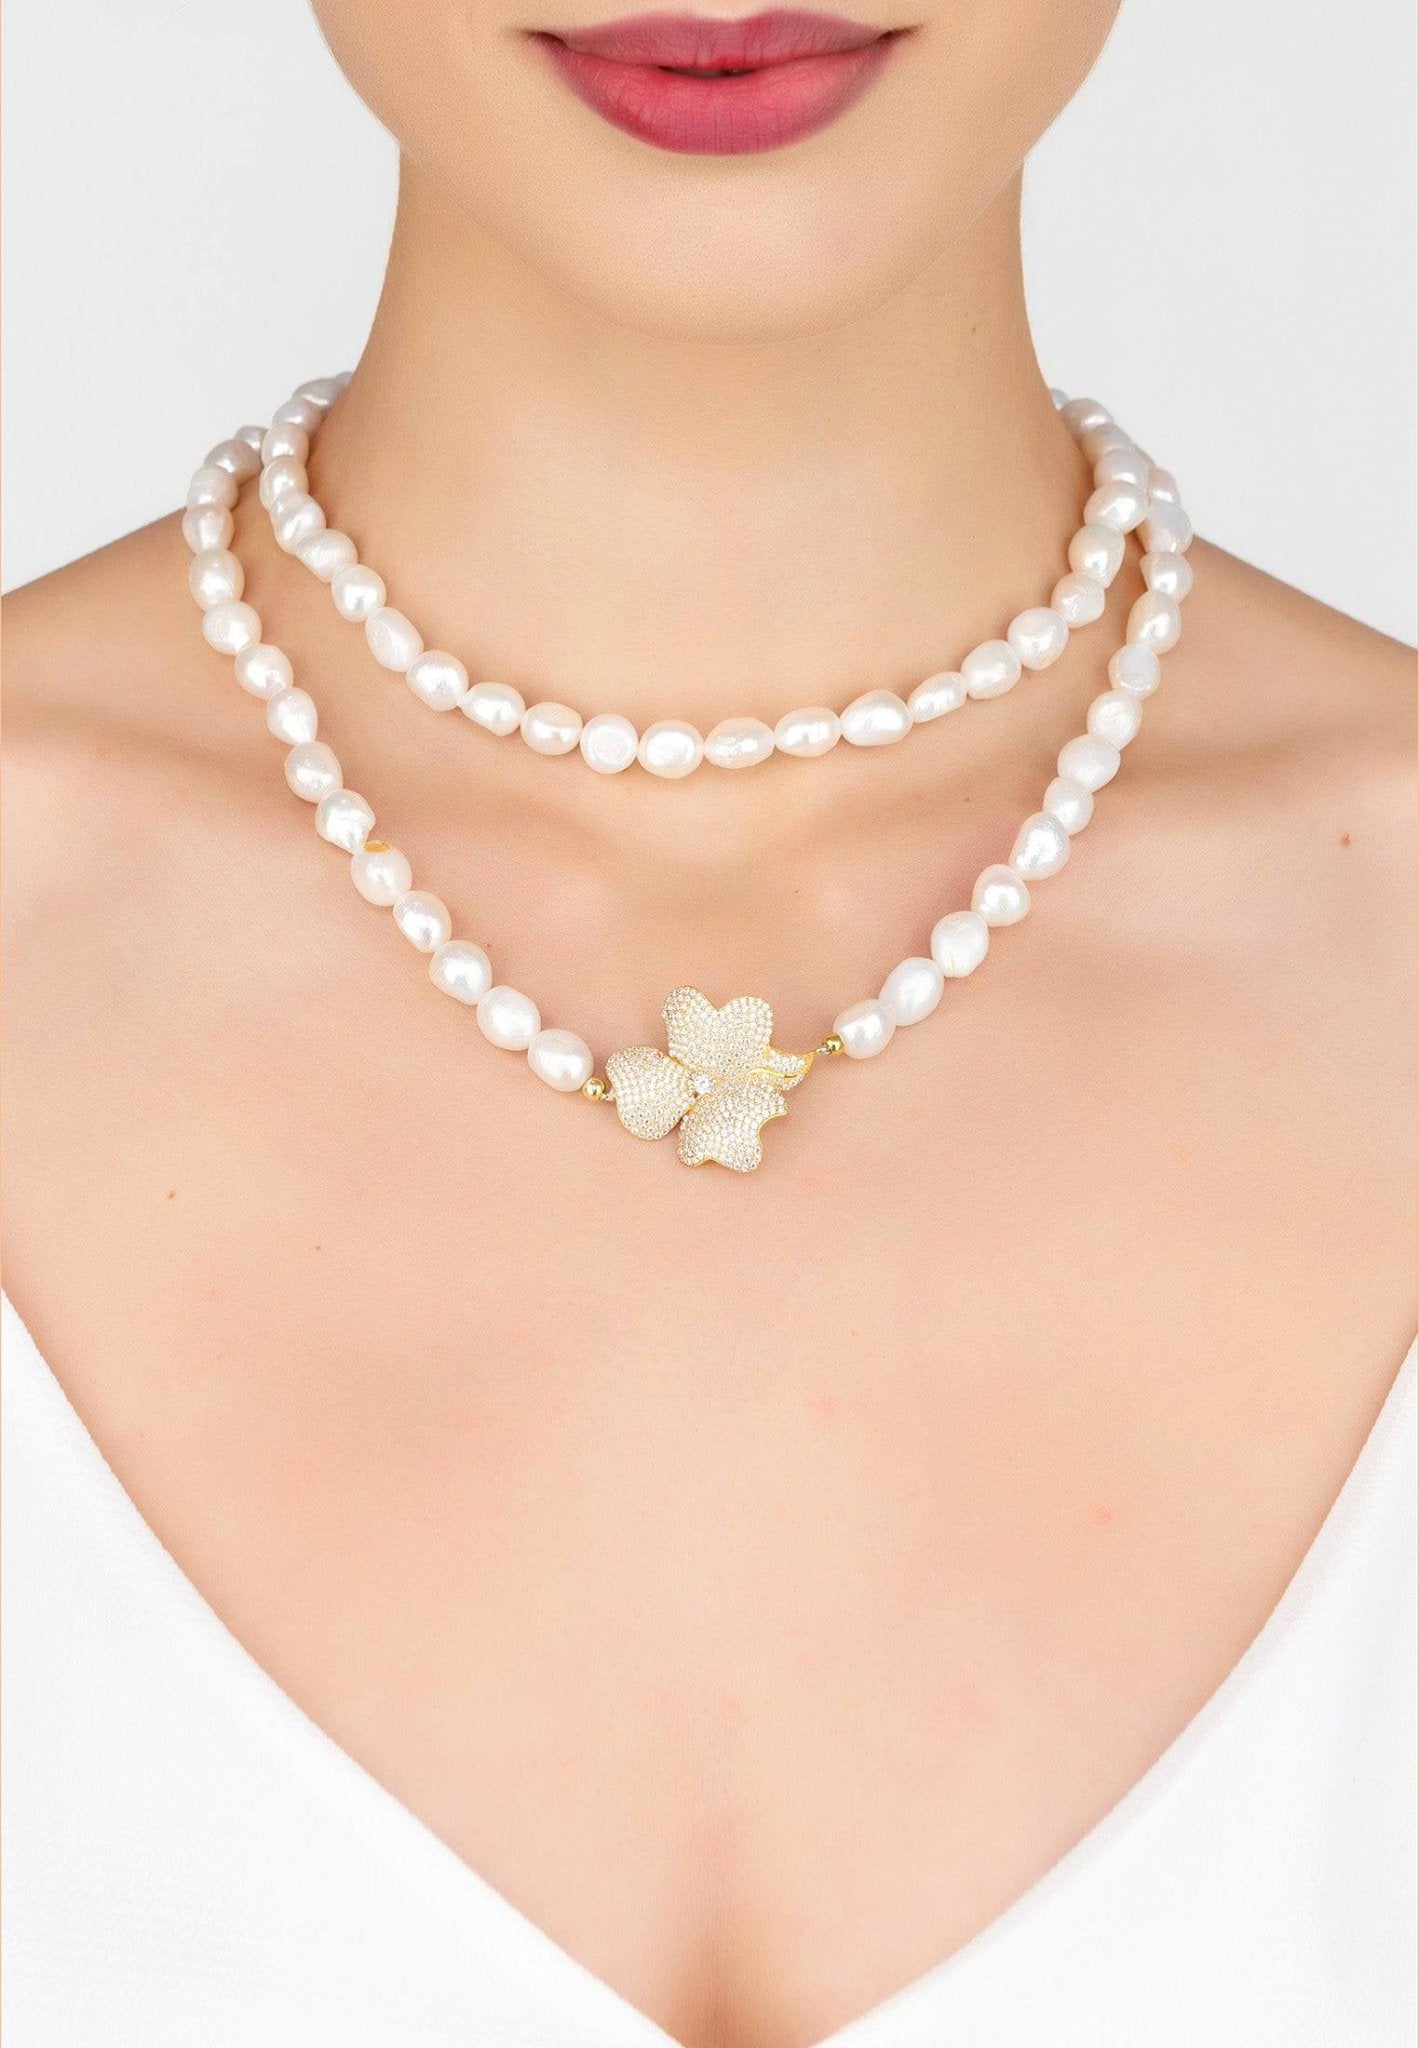 Flower Pearl Gemstone Long Necklace White Cz Gold - LATELITA Necklaces